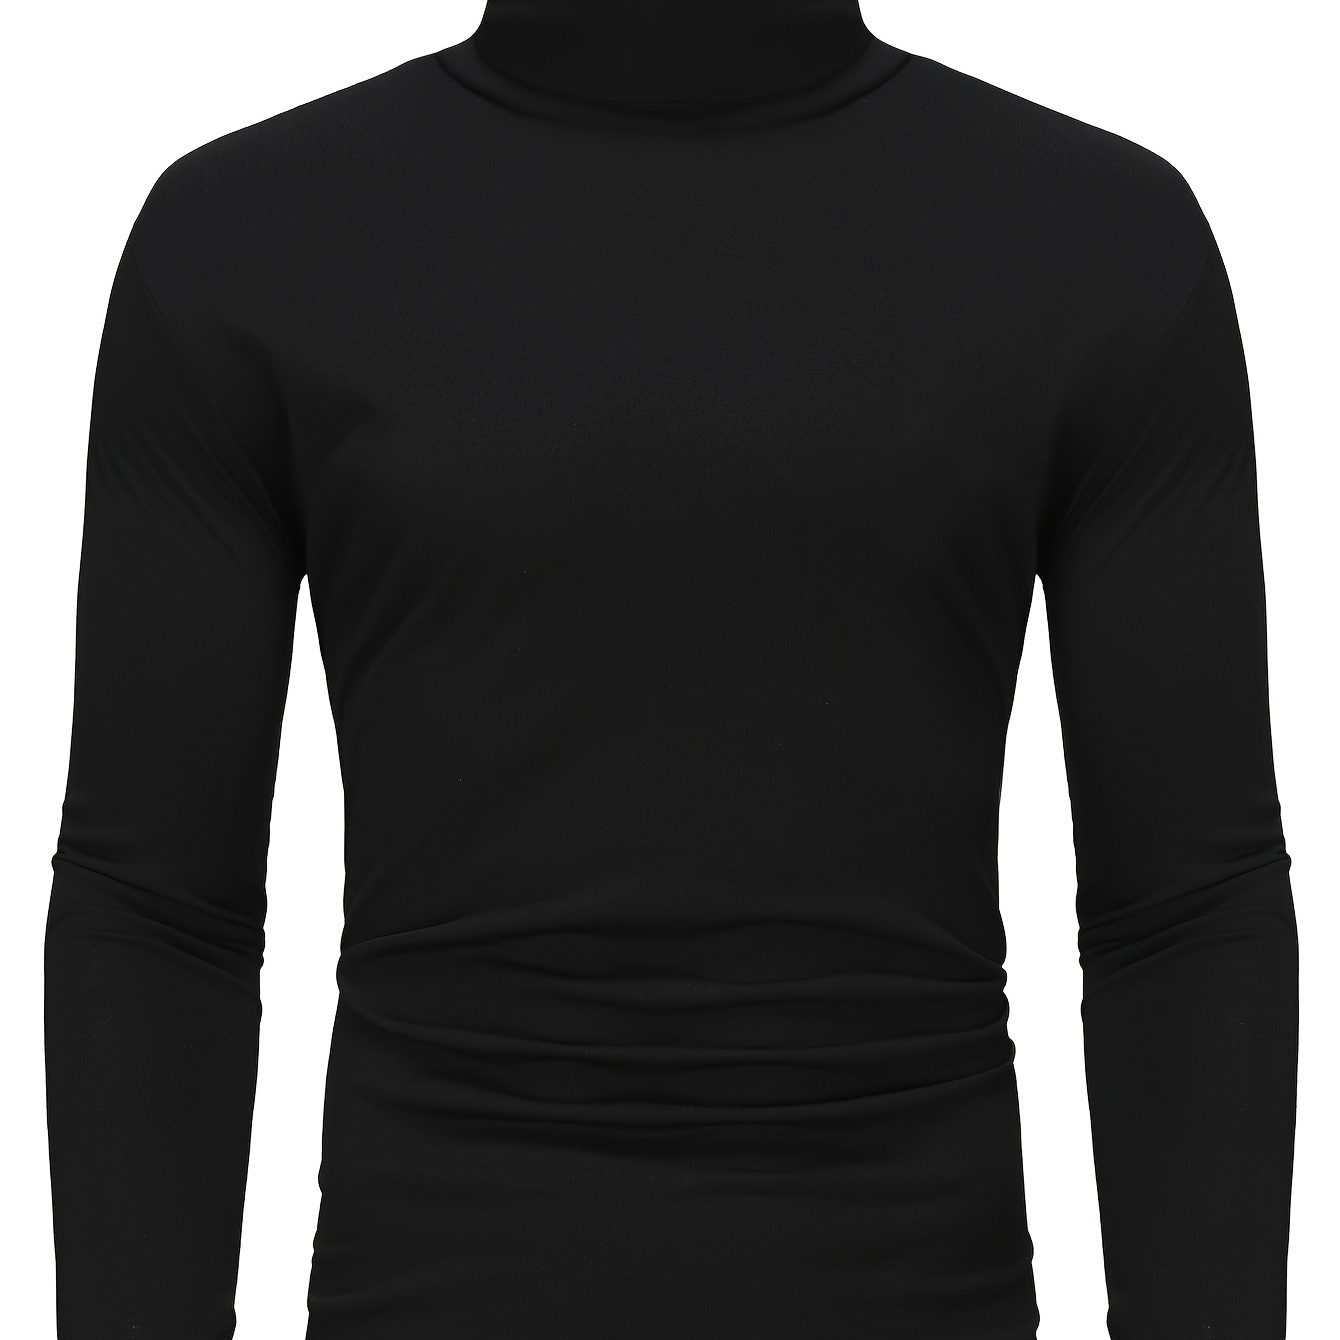 

Bottoming Shirt, Men's High Neck Long Sleeve Tops, Casual Plain Color Warm Base Layer Tops